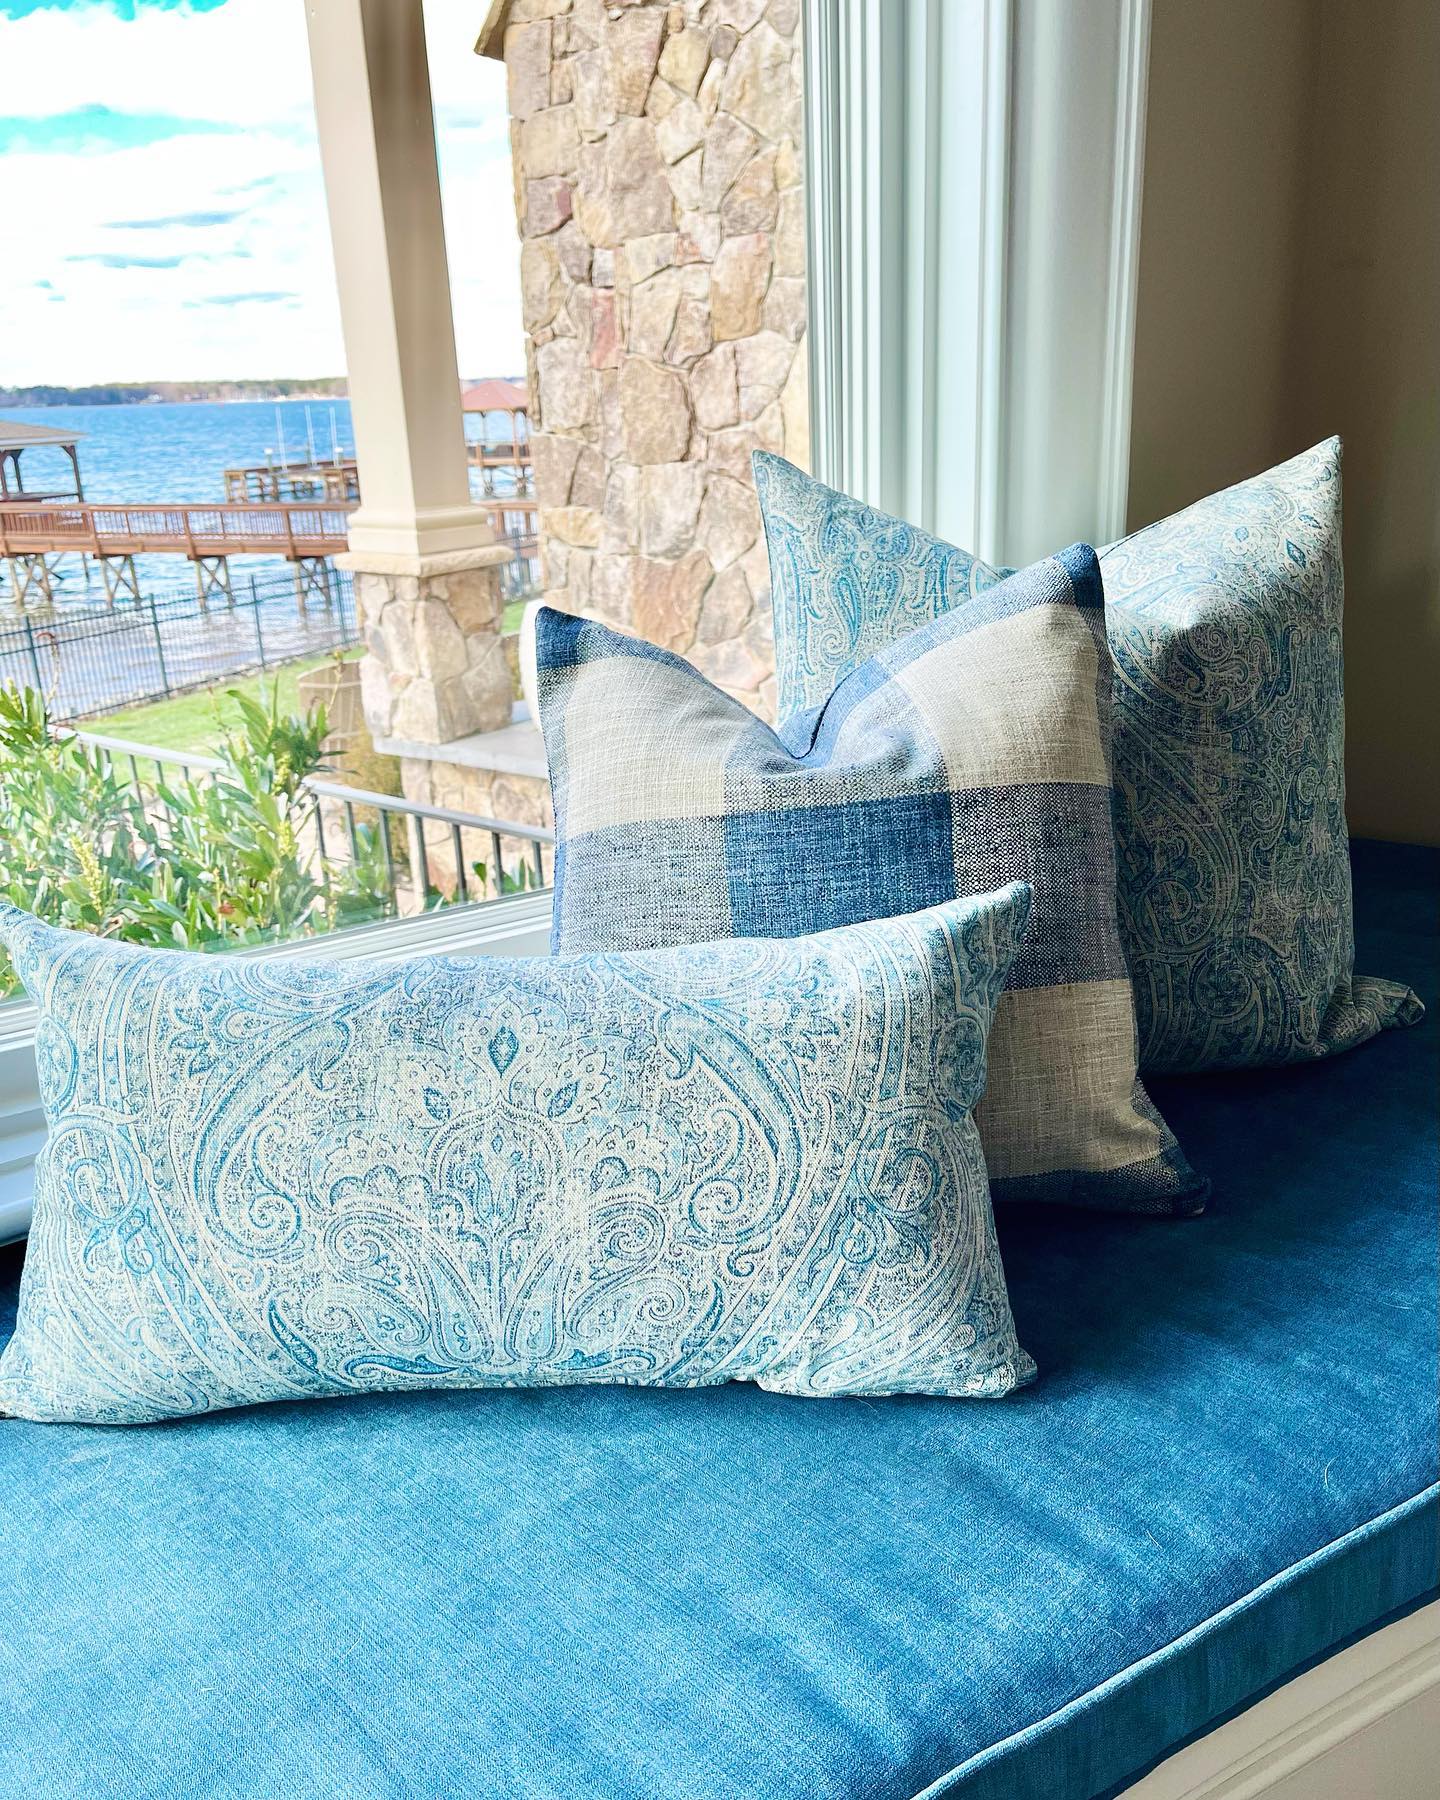 Photo of blue pillows on a bench next to a window with a lakefront view